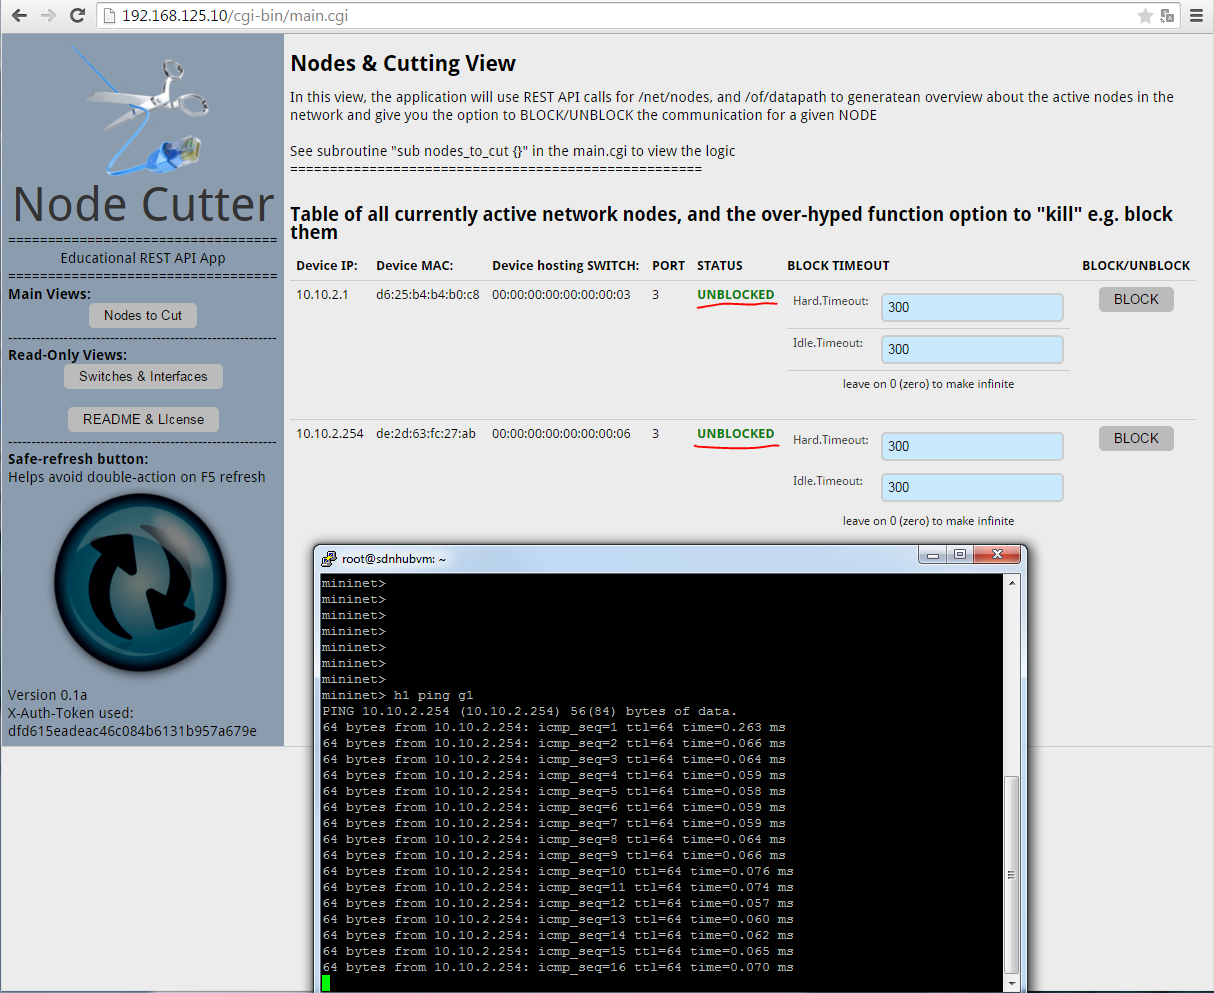 Node Cutter - v0.1 Nodes to Cut view, ping running between H1 and G1